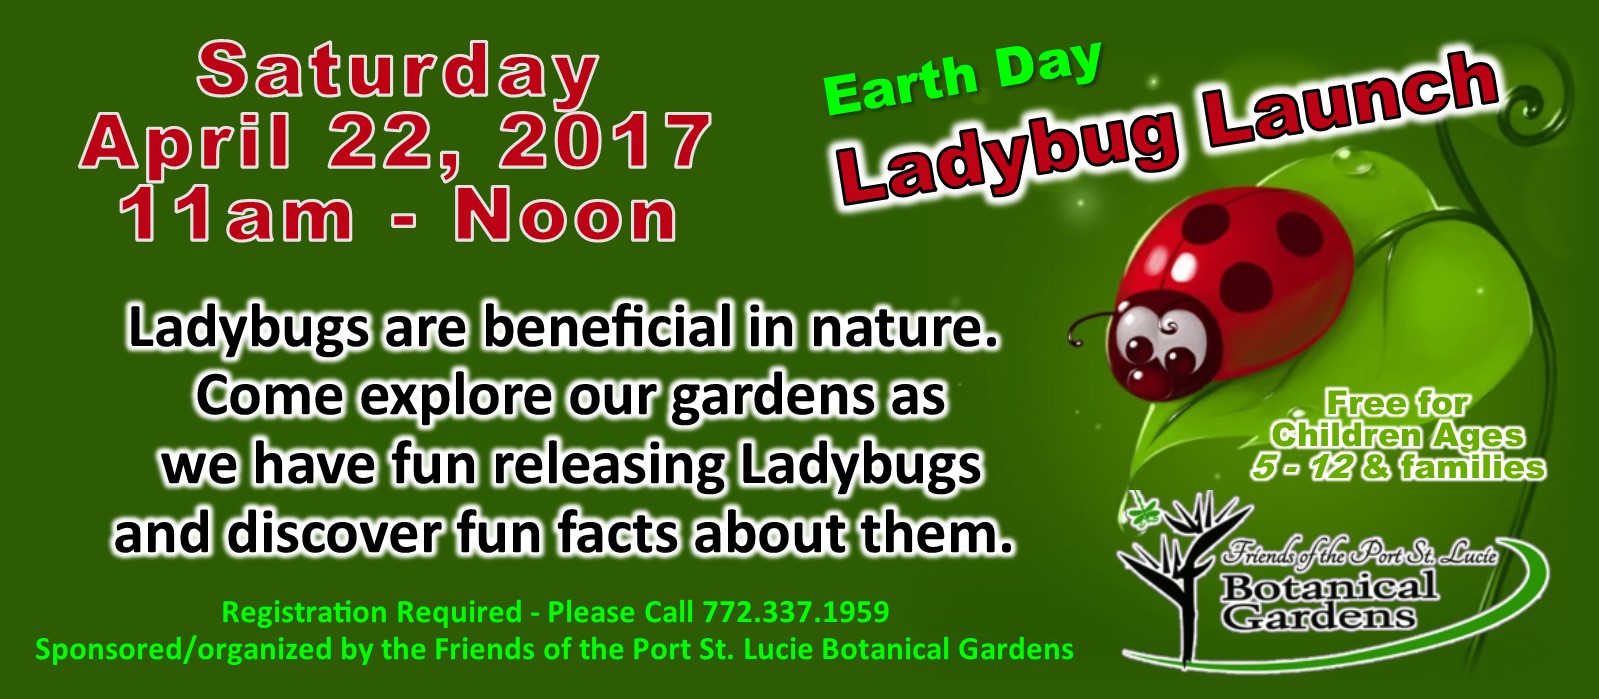 Childrens Event: Earth Day Ladybug Launch